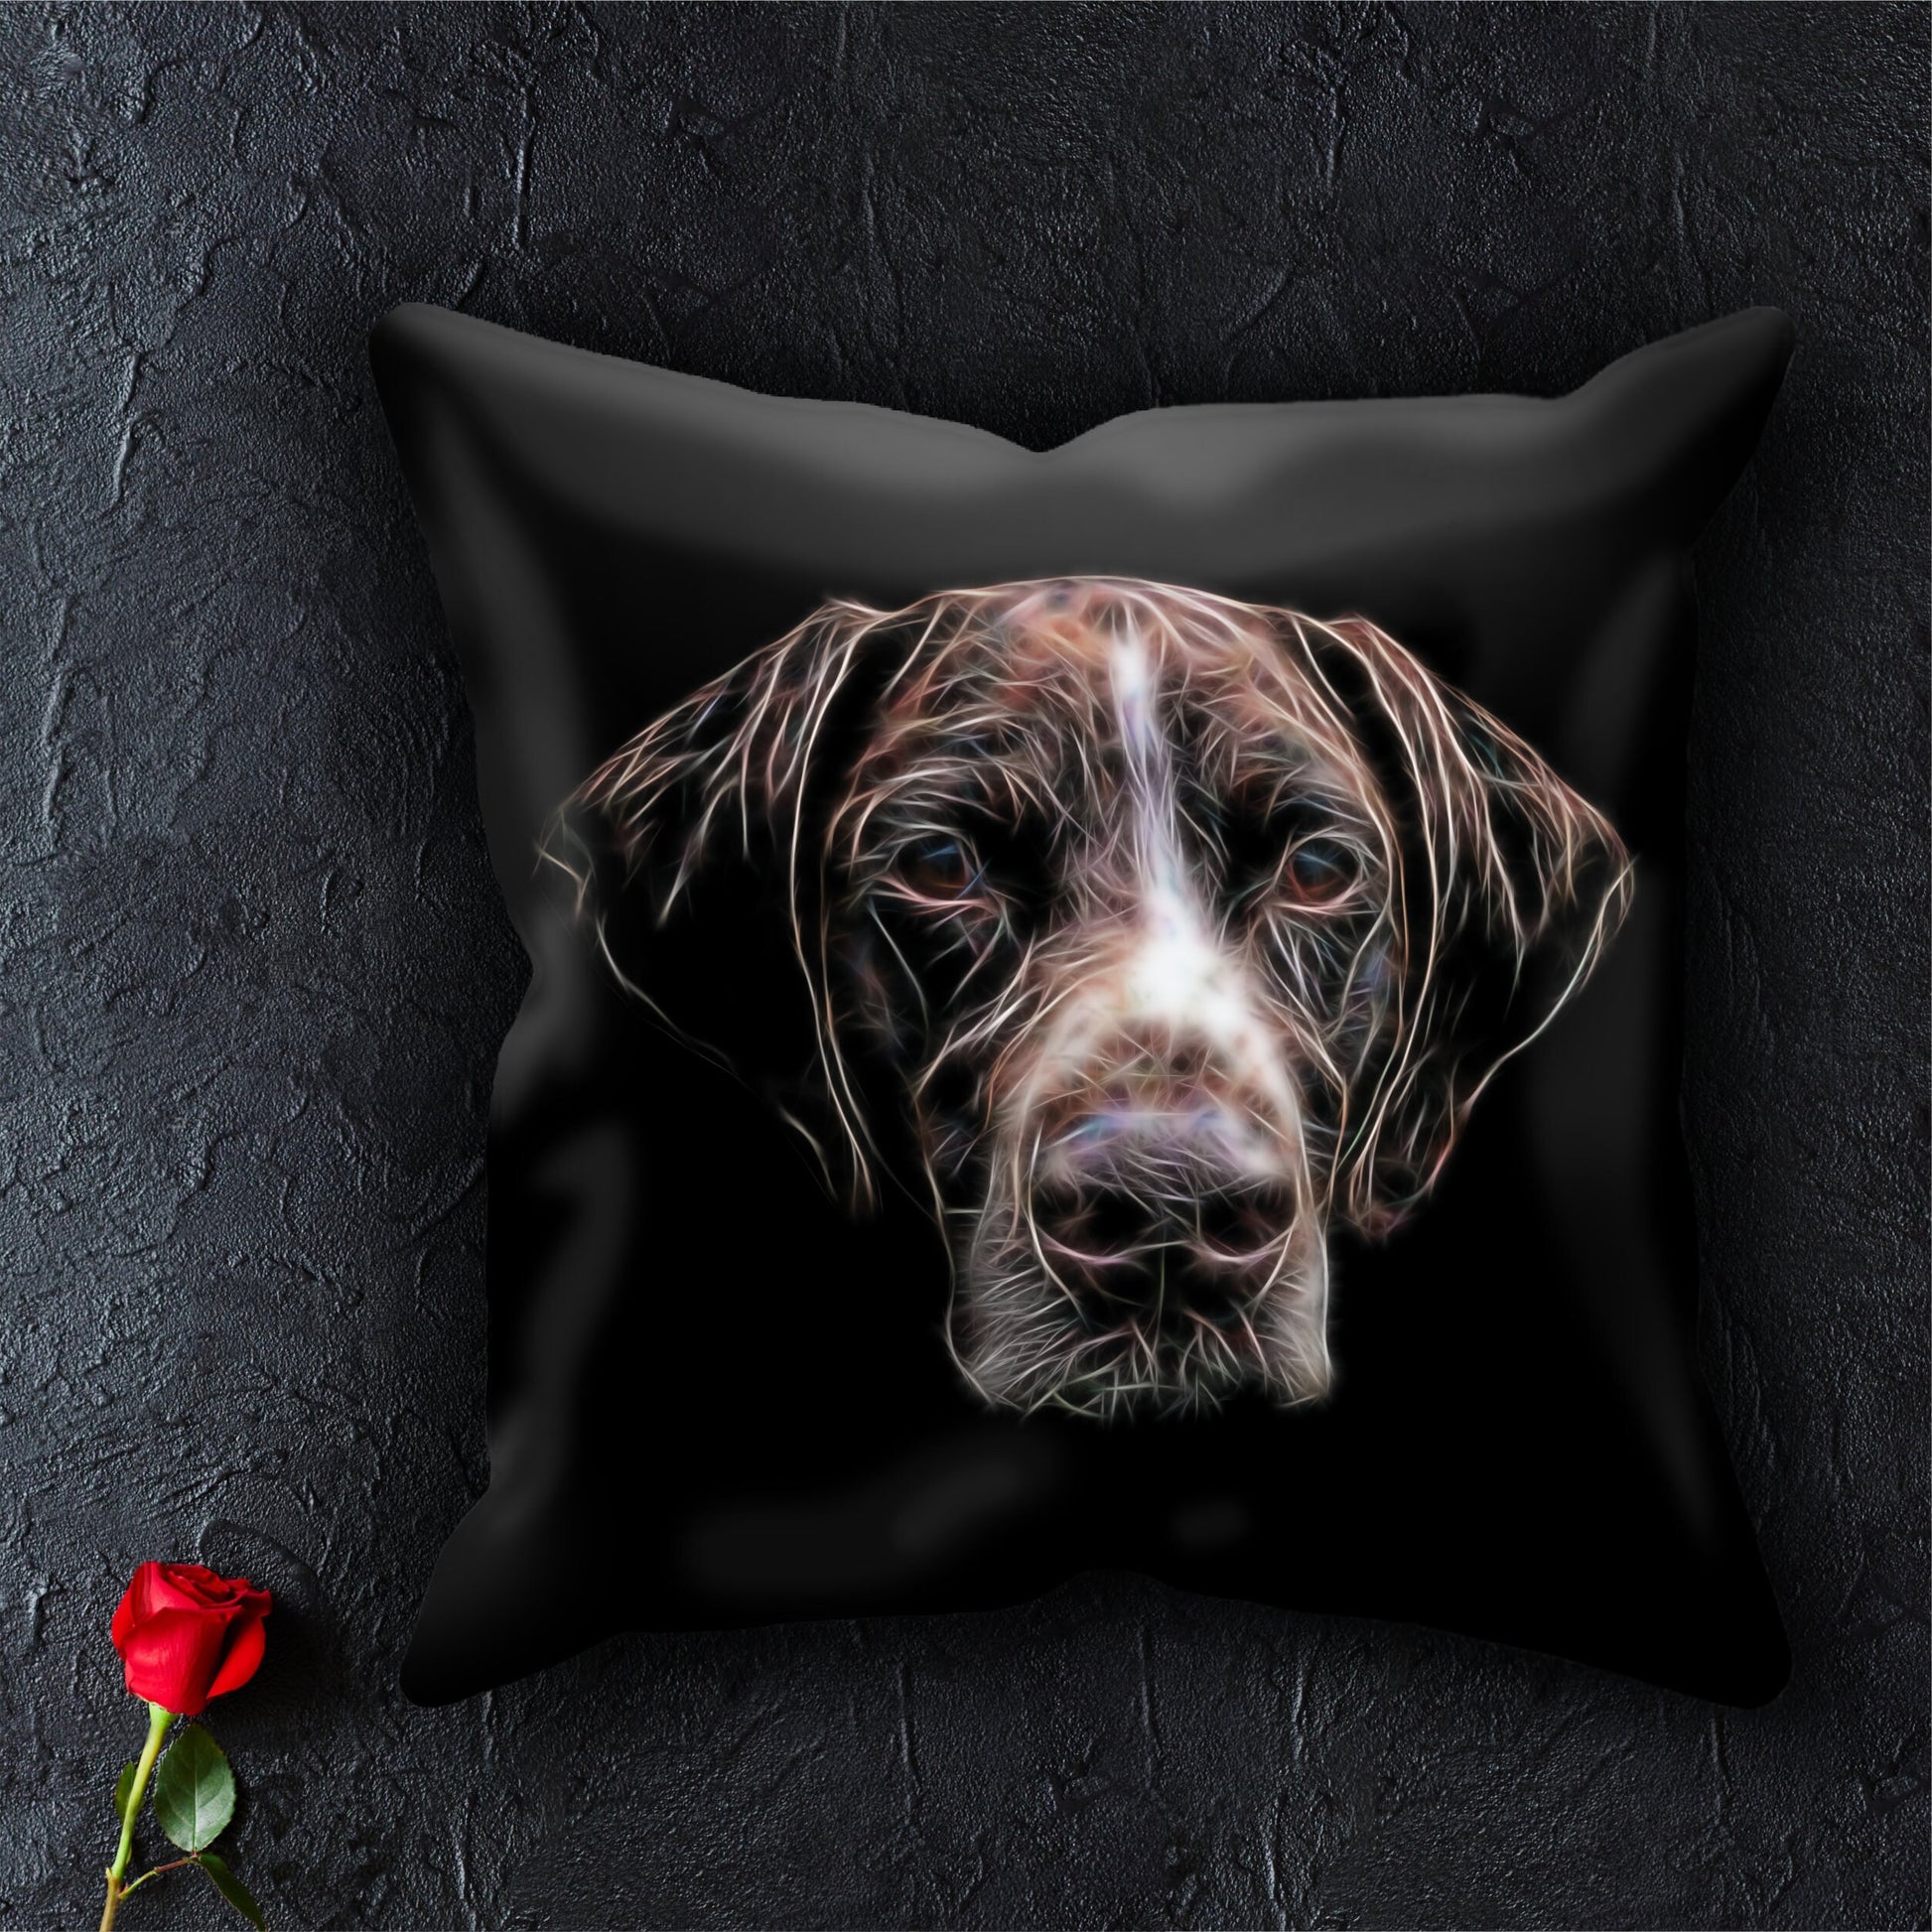 German Shorthaired Pointer Cushion and Insert